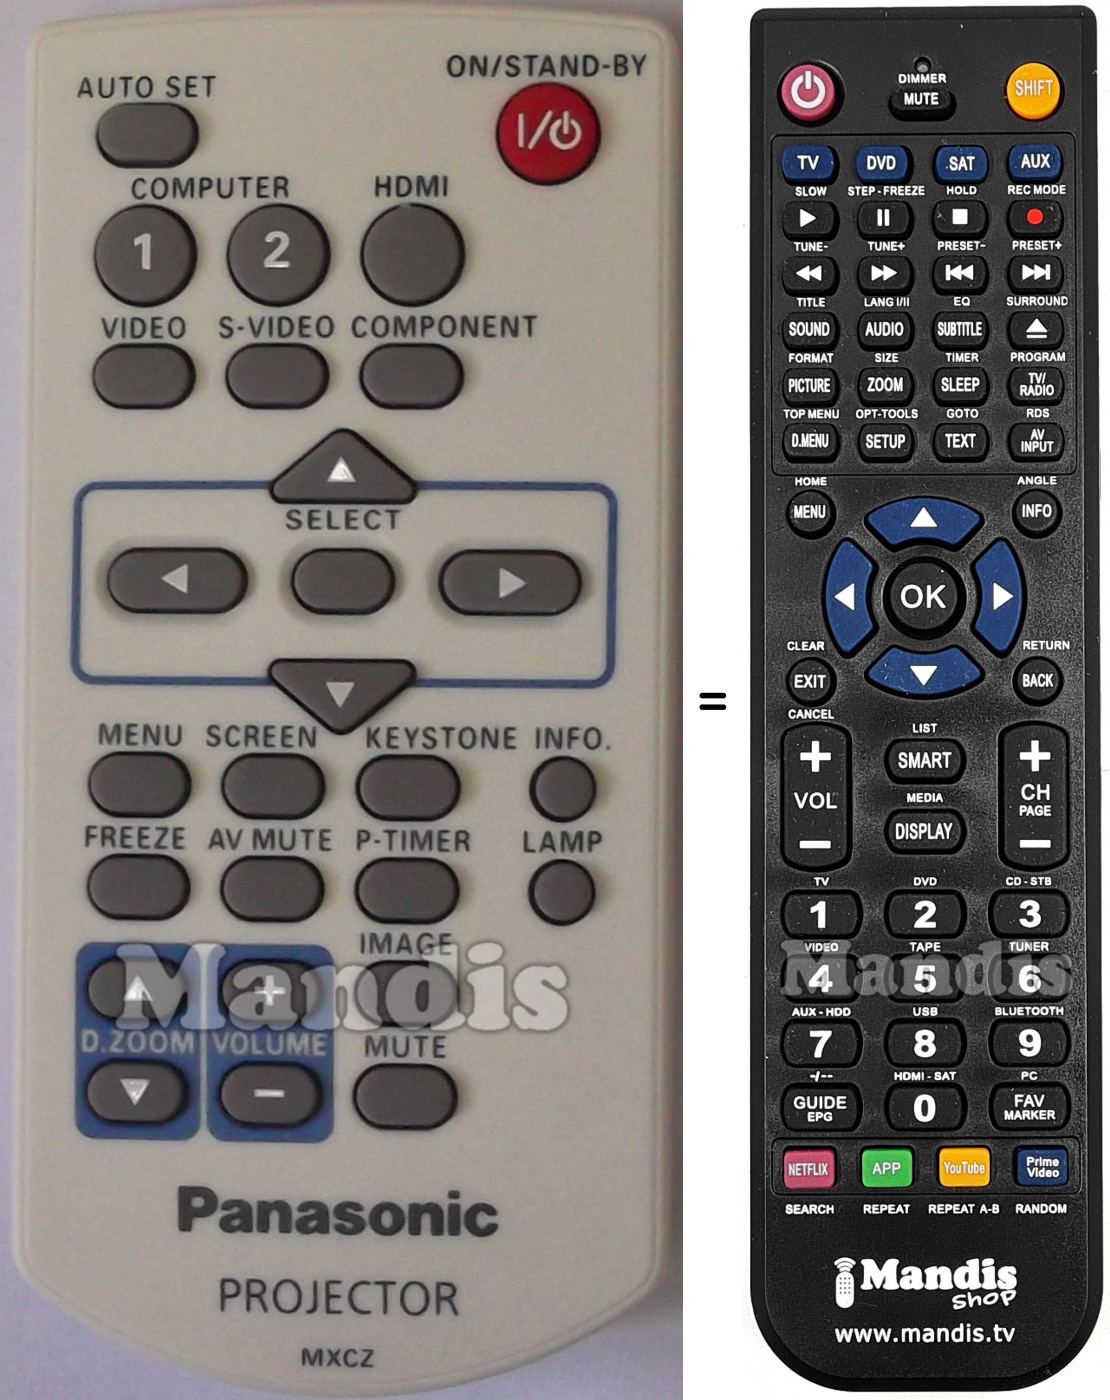 Replacement remote control Panasonic MXCZ